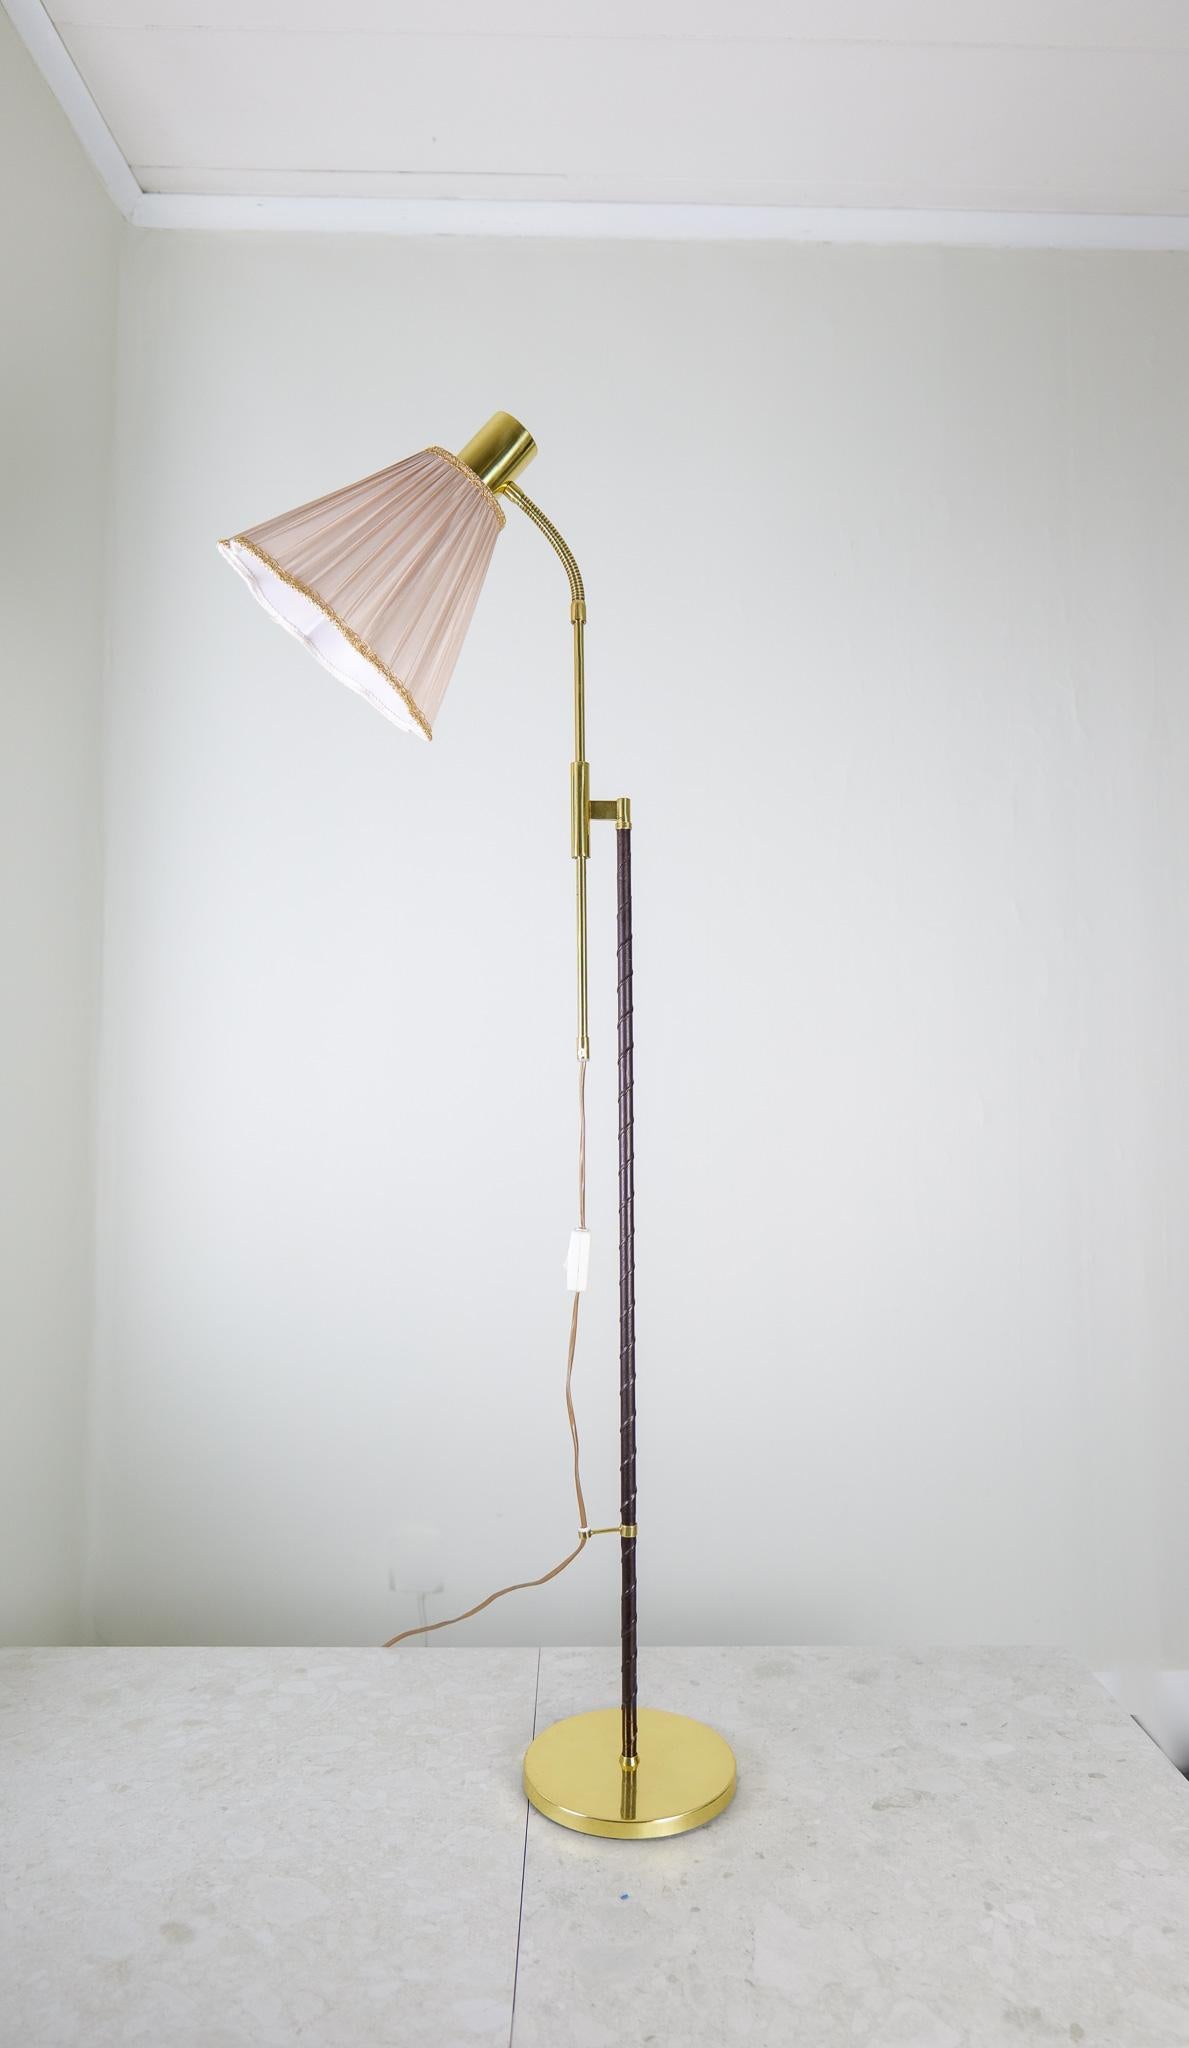 This lamp was made in Sweden at Möllers Armatur Eskilstuna. It has an adjustable height arm and is made in brass and cast iron with a partial made leather rod. 

Good working condition with some dents on the foot and scratches on the